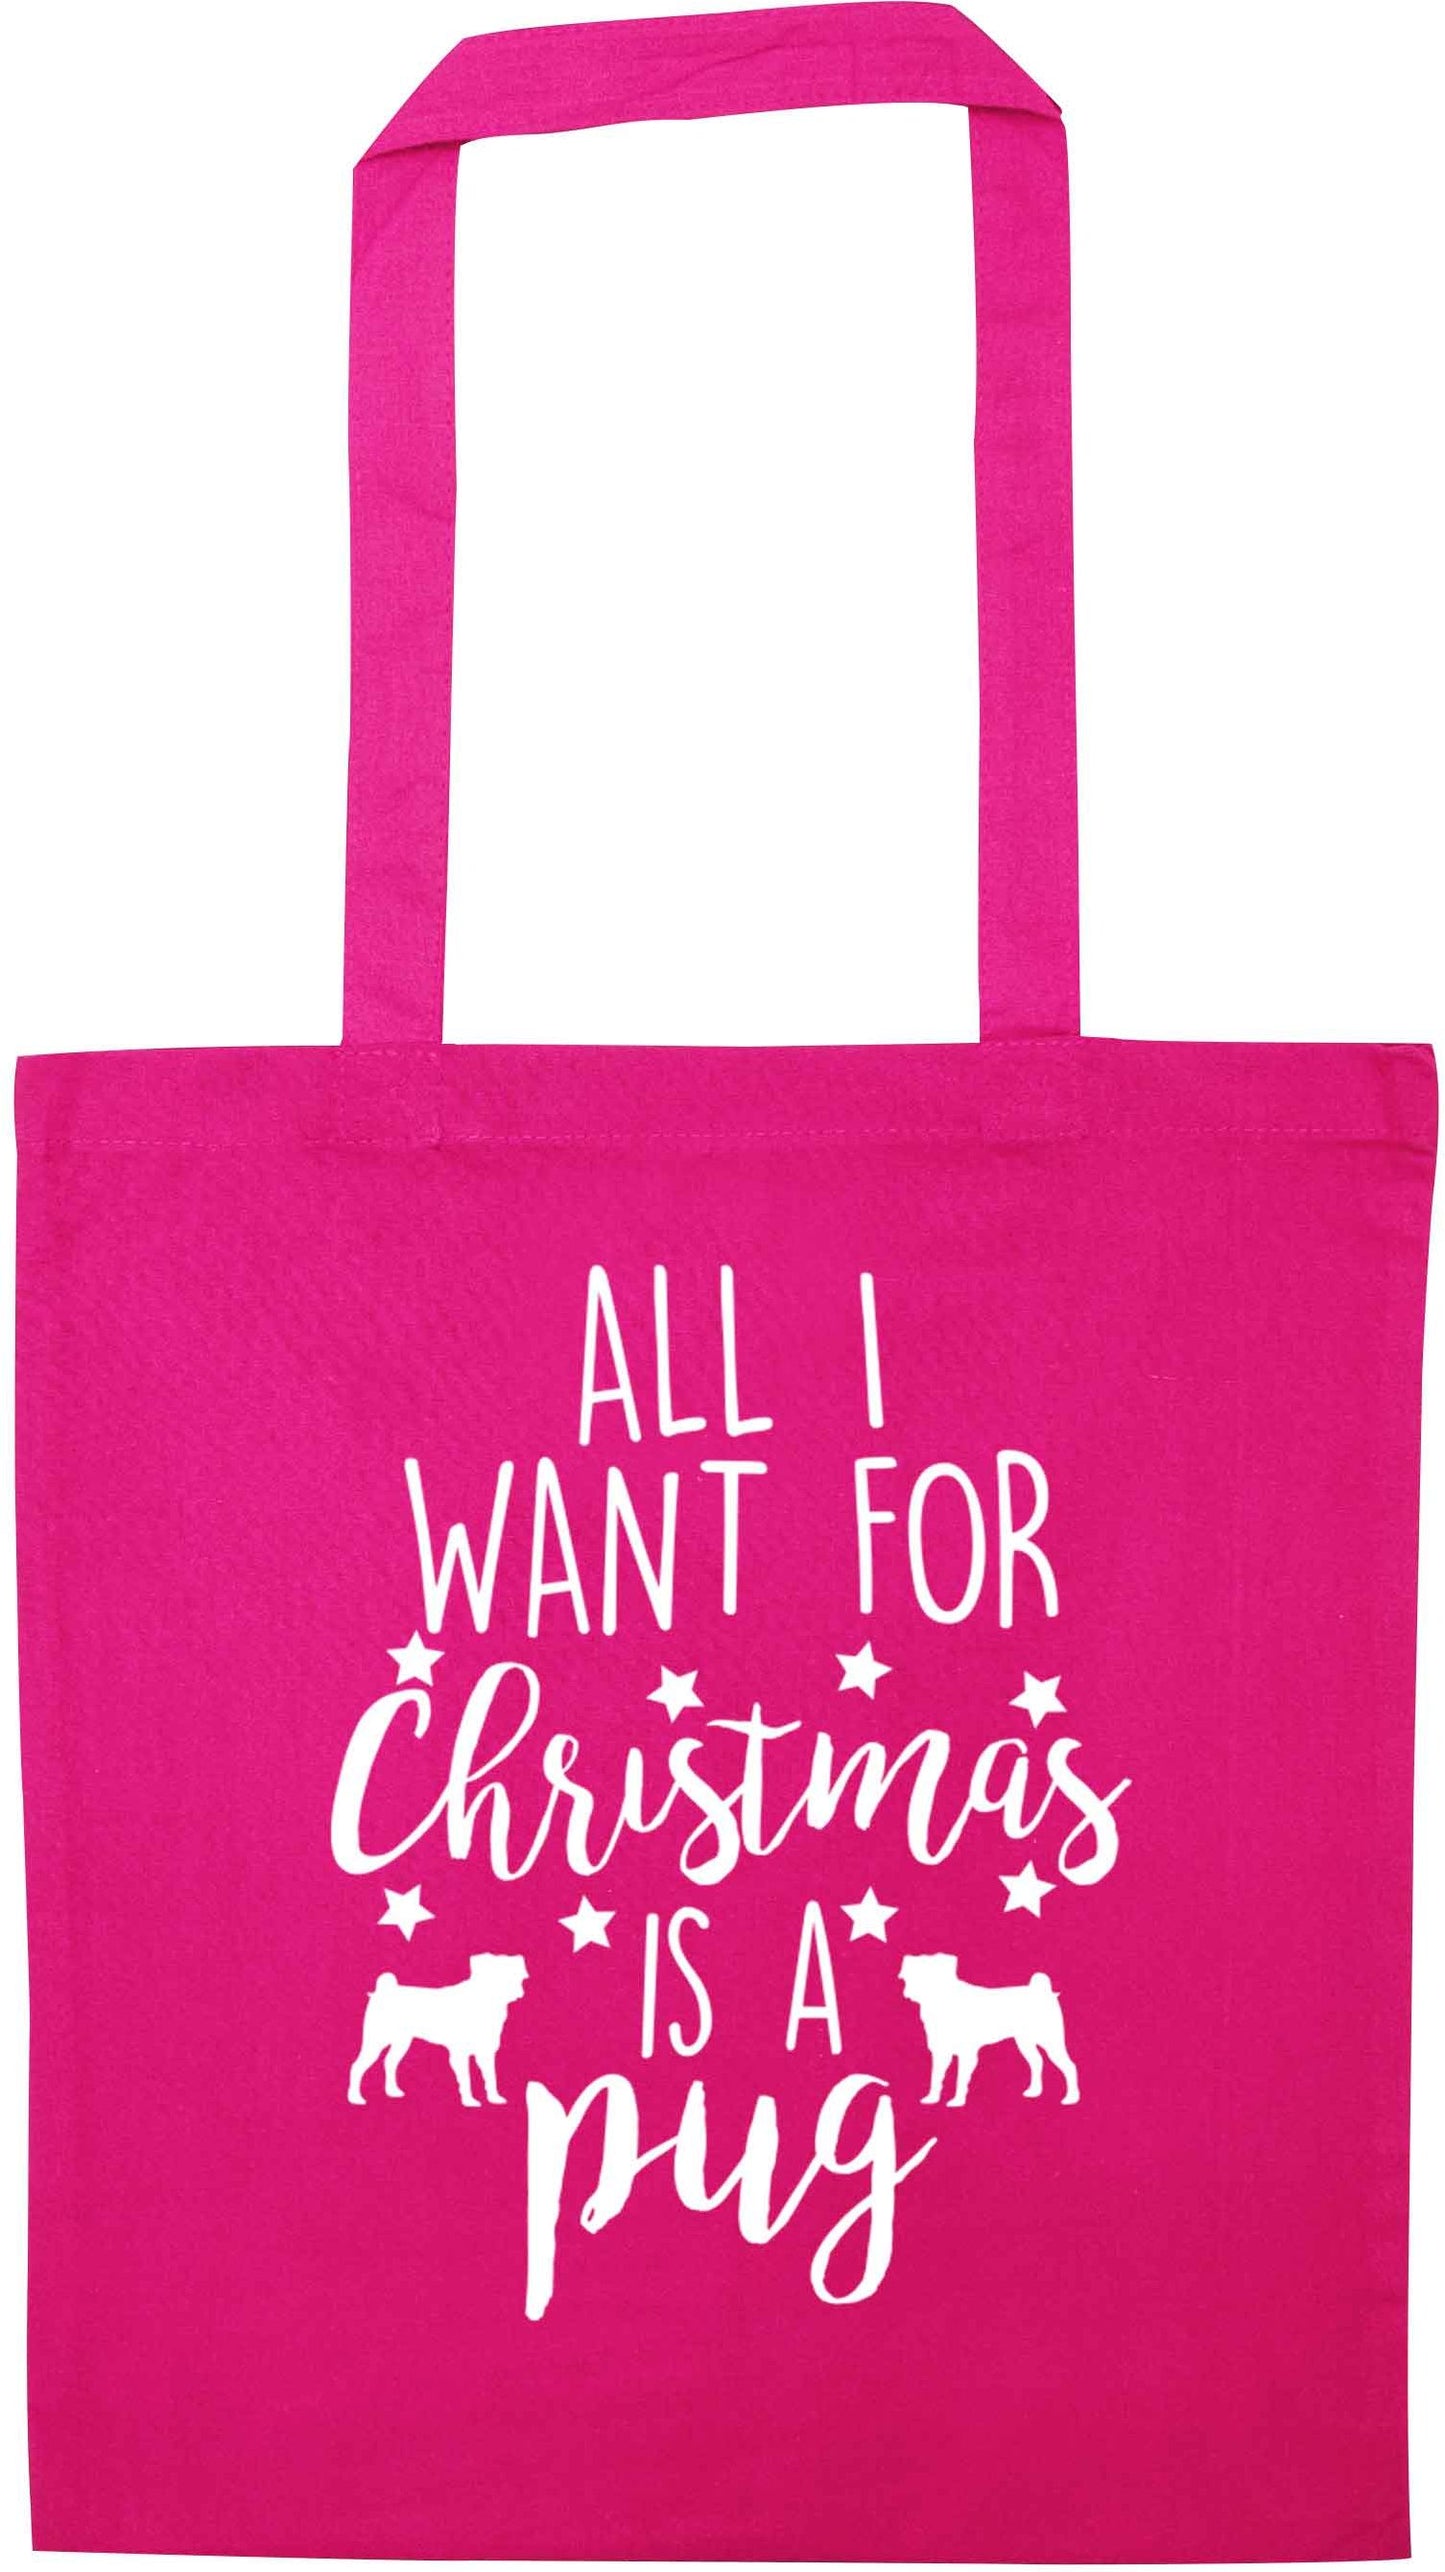 All I want for Christmas is a pug pink tote bag